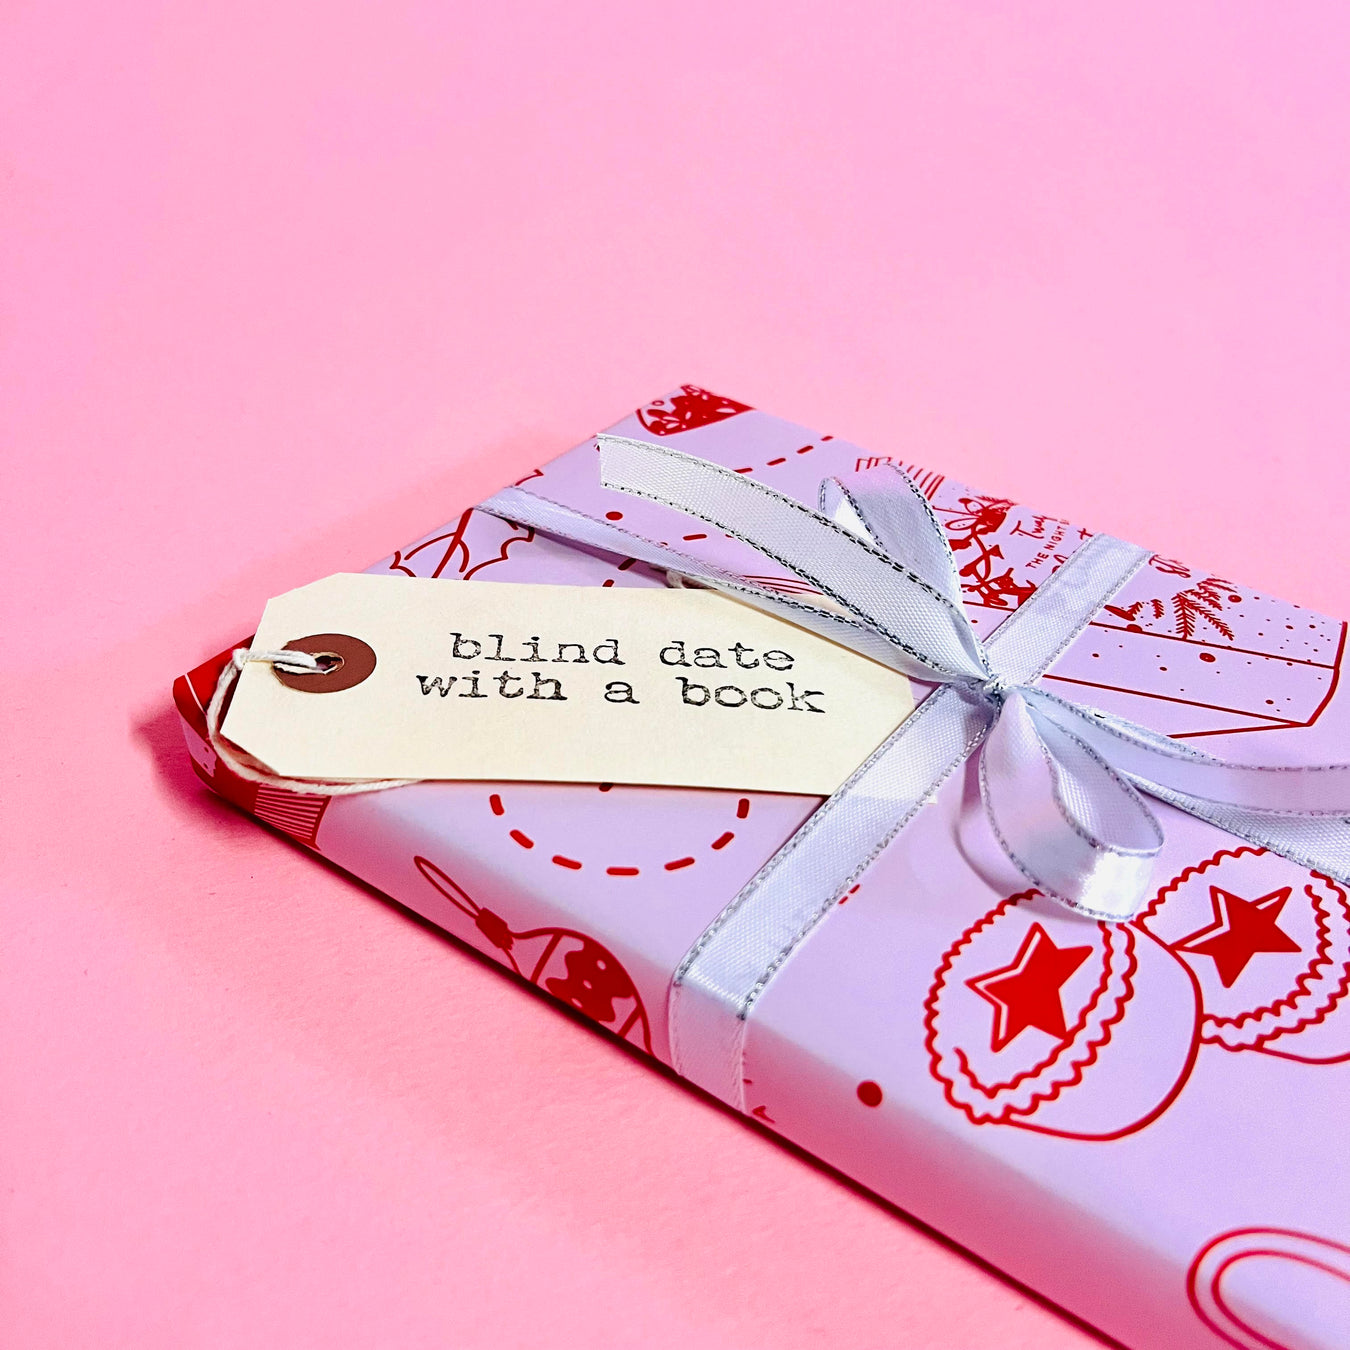 Top 70 gifts for a book lover, bookworm, readers ad bibliophile. Blind date with a book. Christmas Edition. Bookishly.